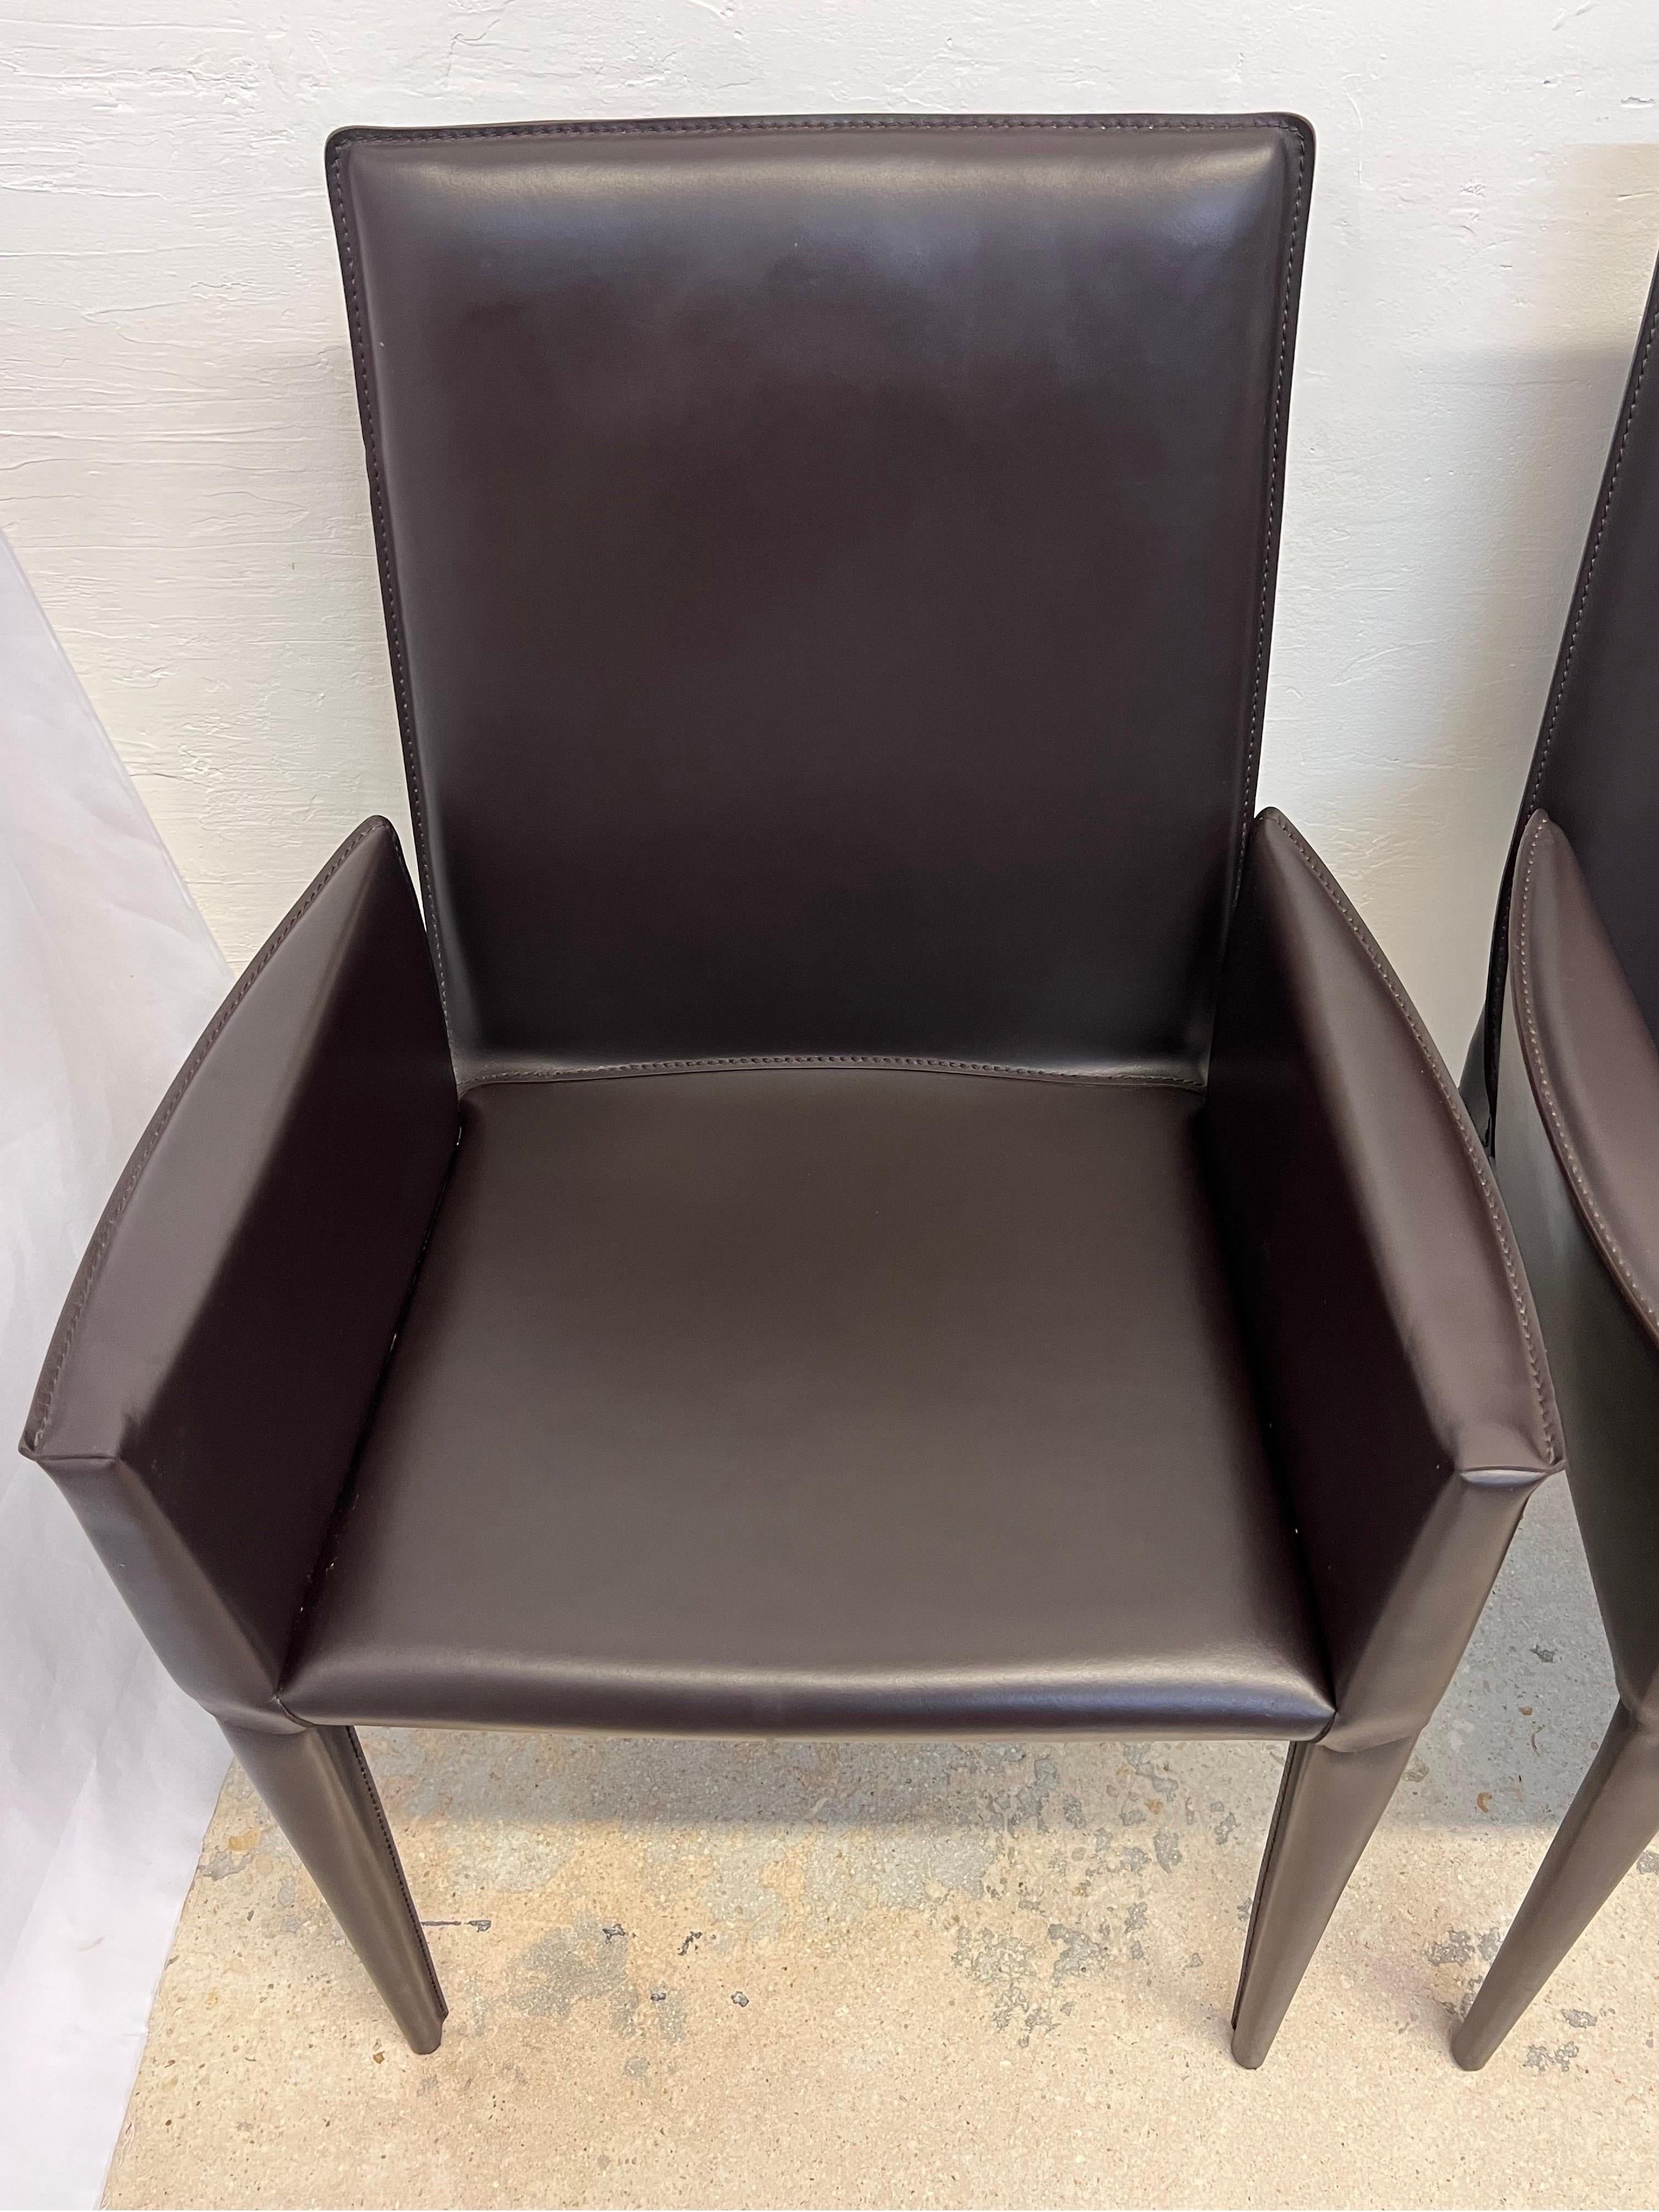 Steel Bottega Leather Dining Arm Chairs by Fauciglietti and Bianchi for DWR, Pair For Sale